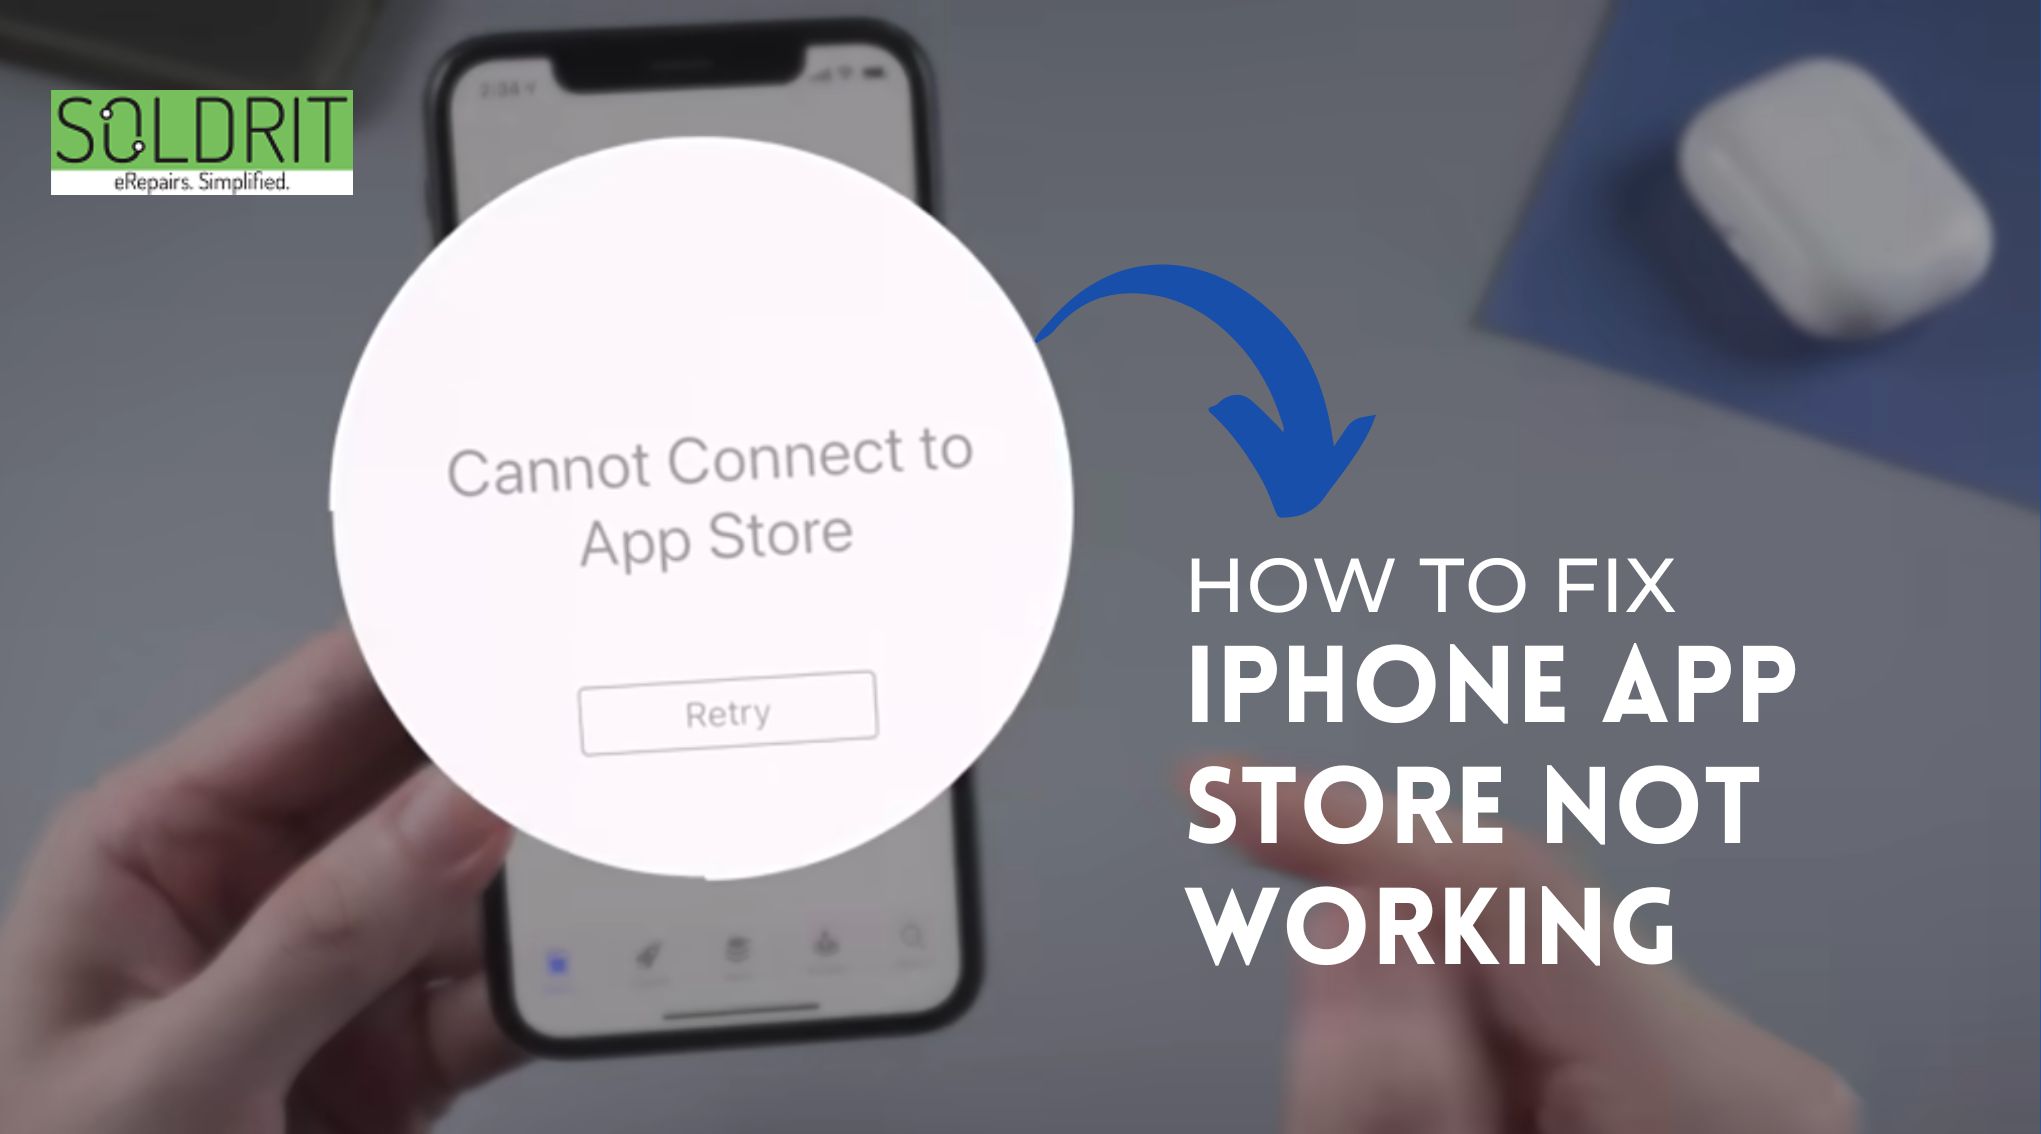 iPhone App Store Not Working Issues: Quick Fixes and Solutions